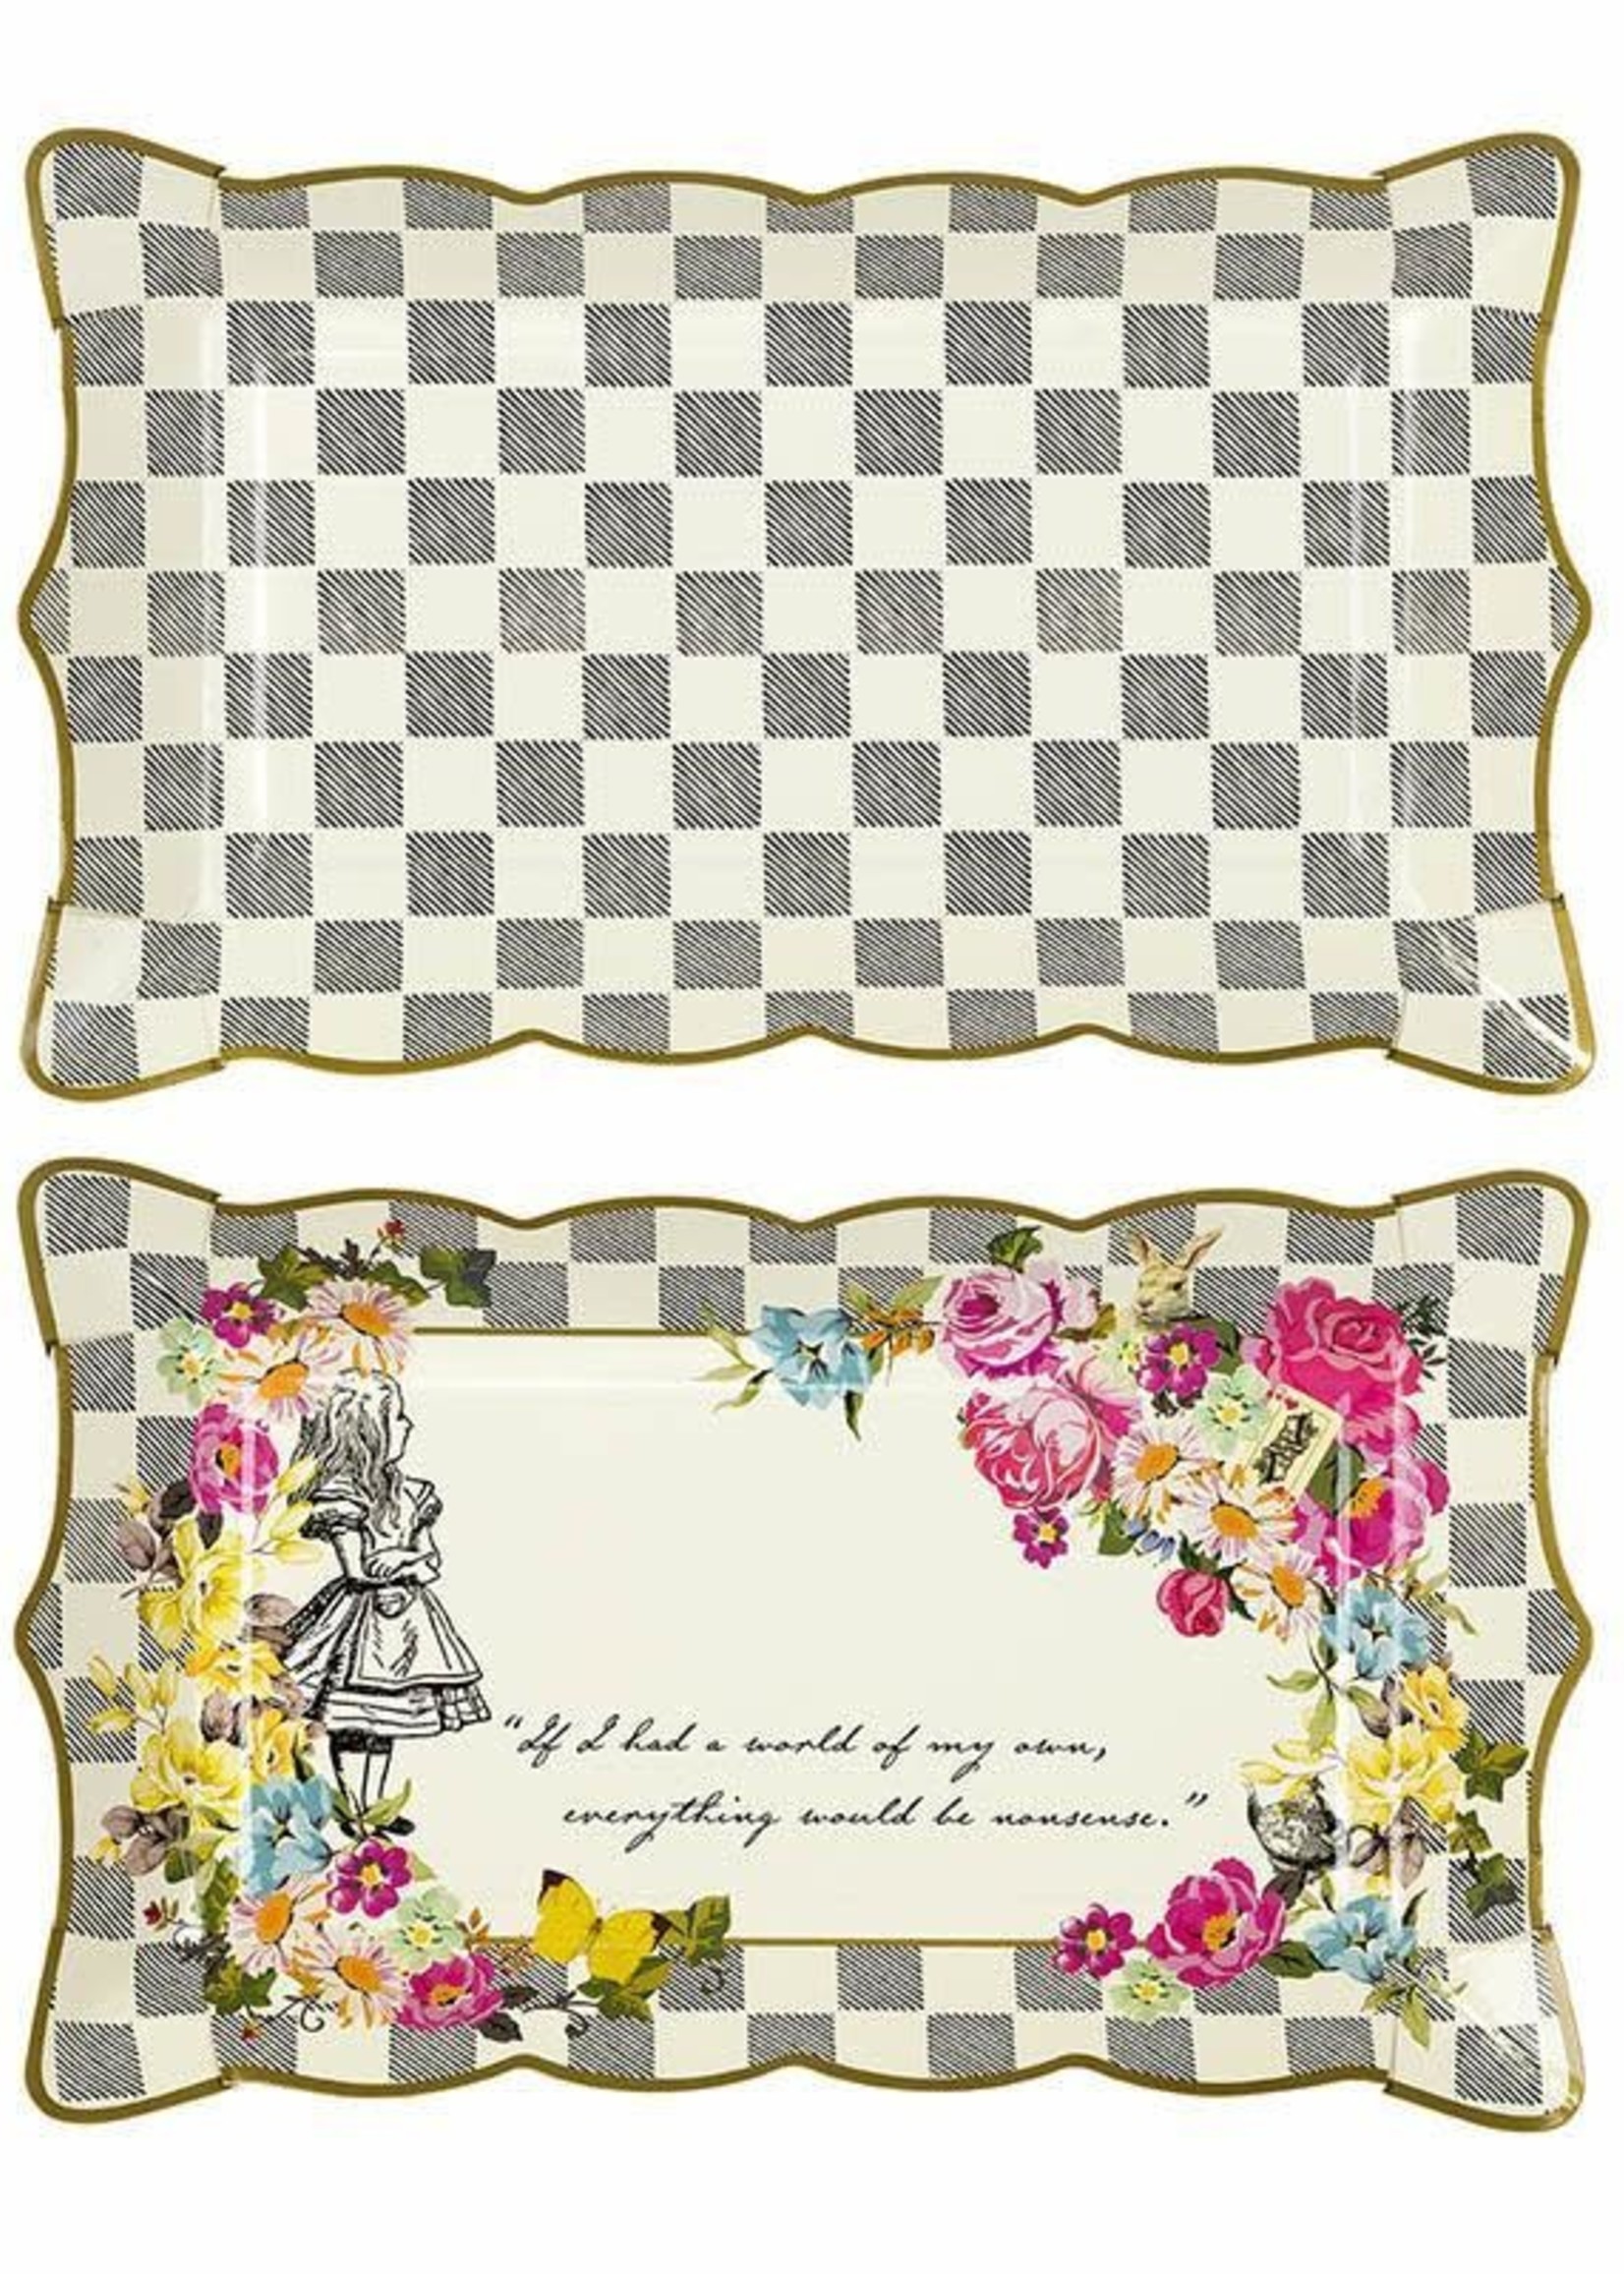 Talking Tables Truly Alice 4 puzzling Party Platters - 2 designs (2 of each design in the package)